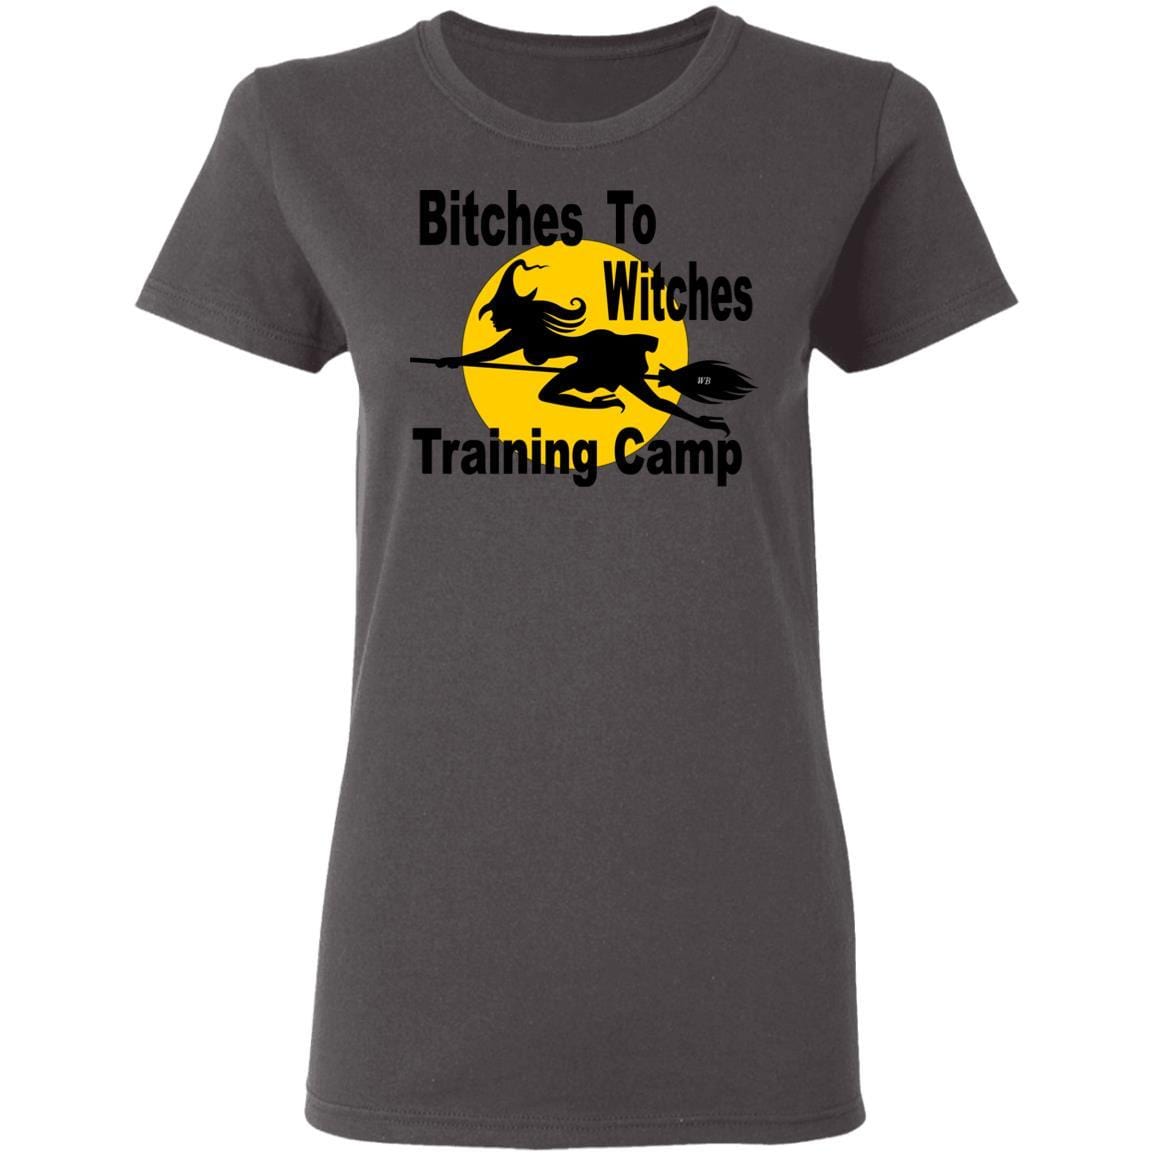 T-Shirts Charcoal / S WineyBitches.Co "Bitches To Witches Training Camp" Halloween Ladies' 5.3 oz. T-Shirt WineyBitchesCo